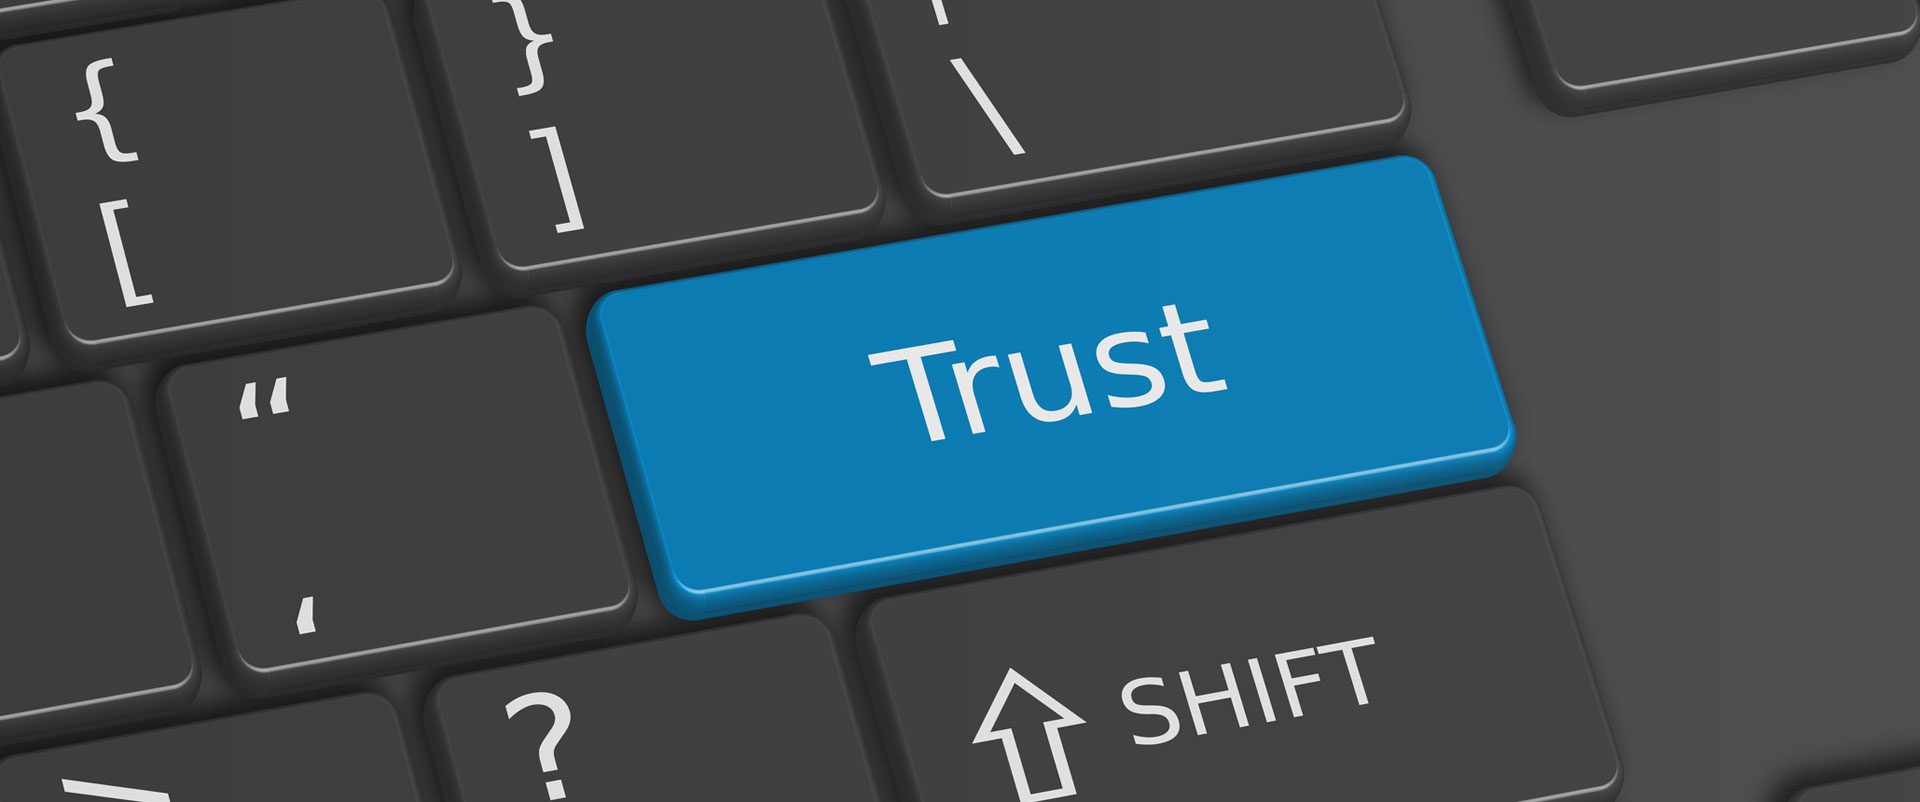 10 Ways You Can Make Your Website More Trustworthy